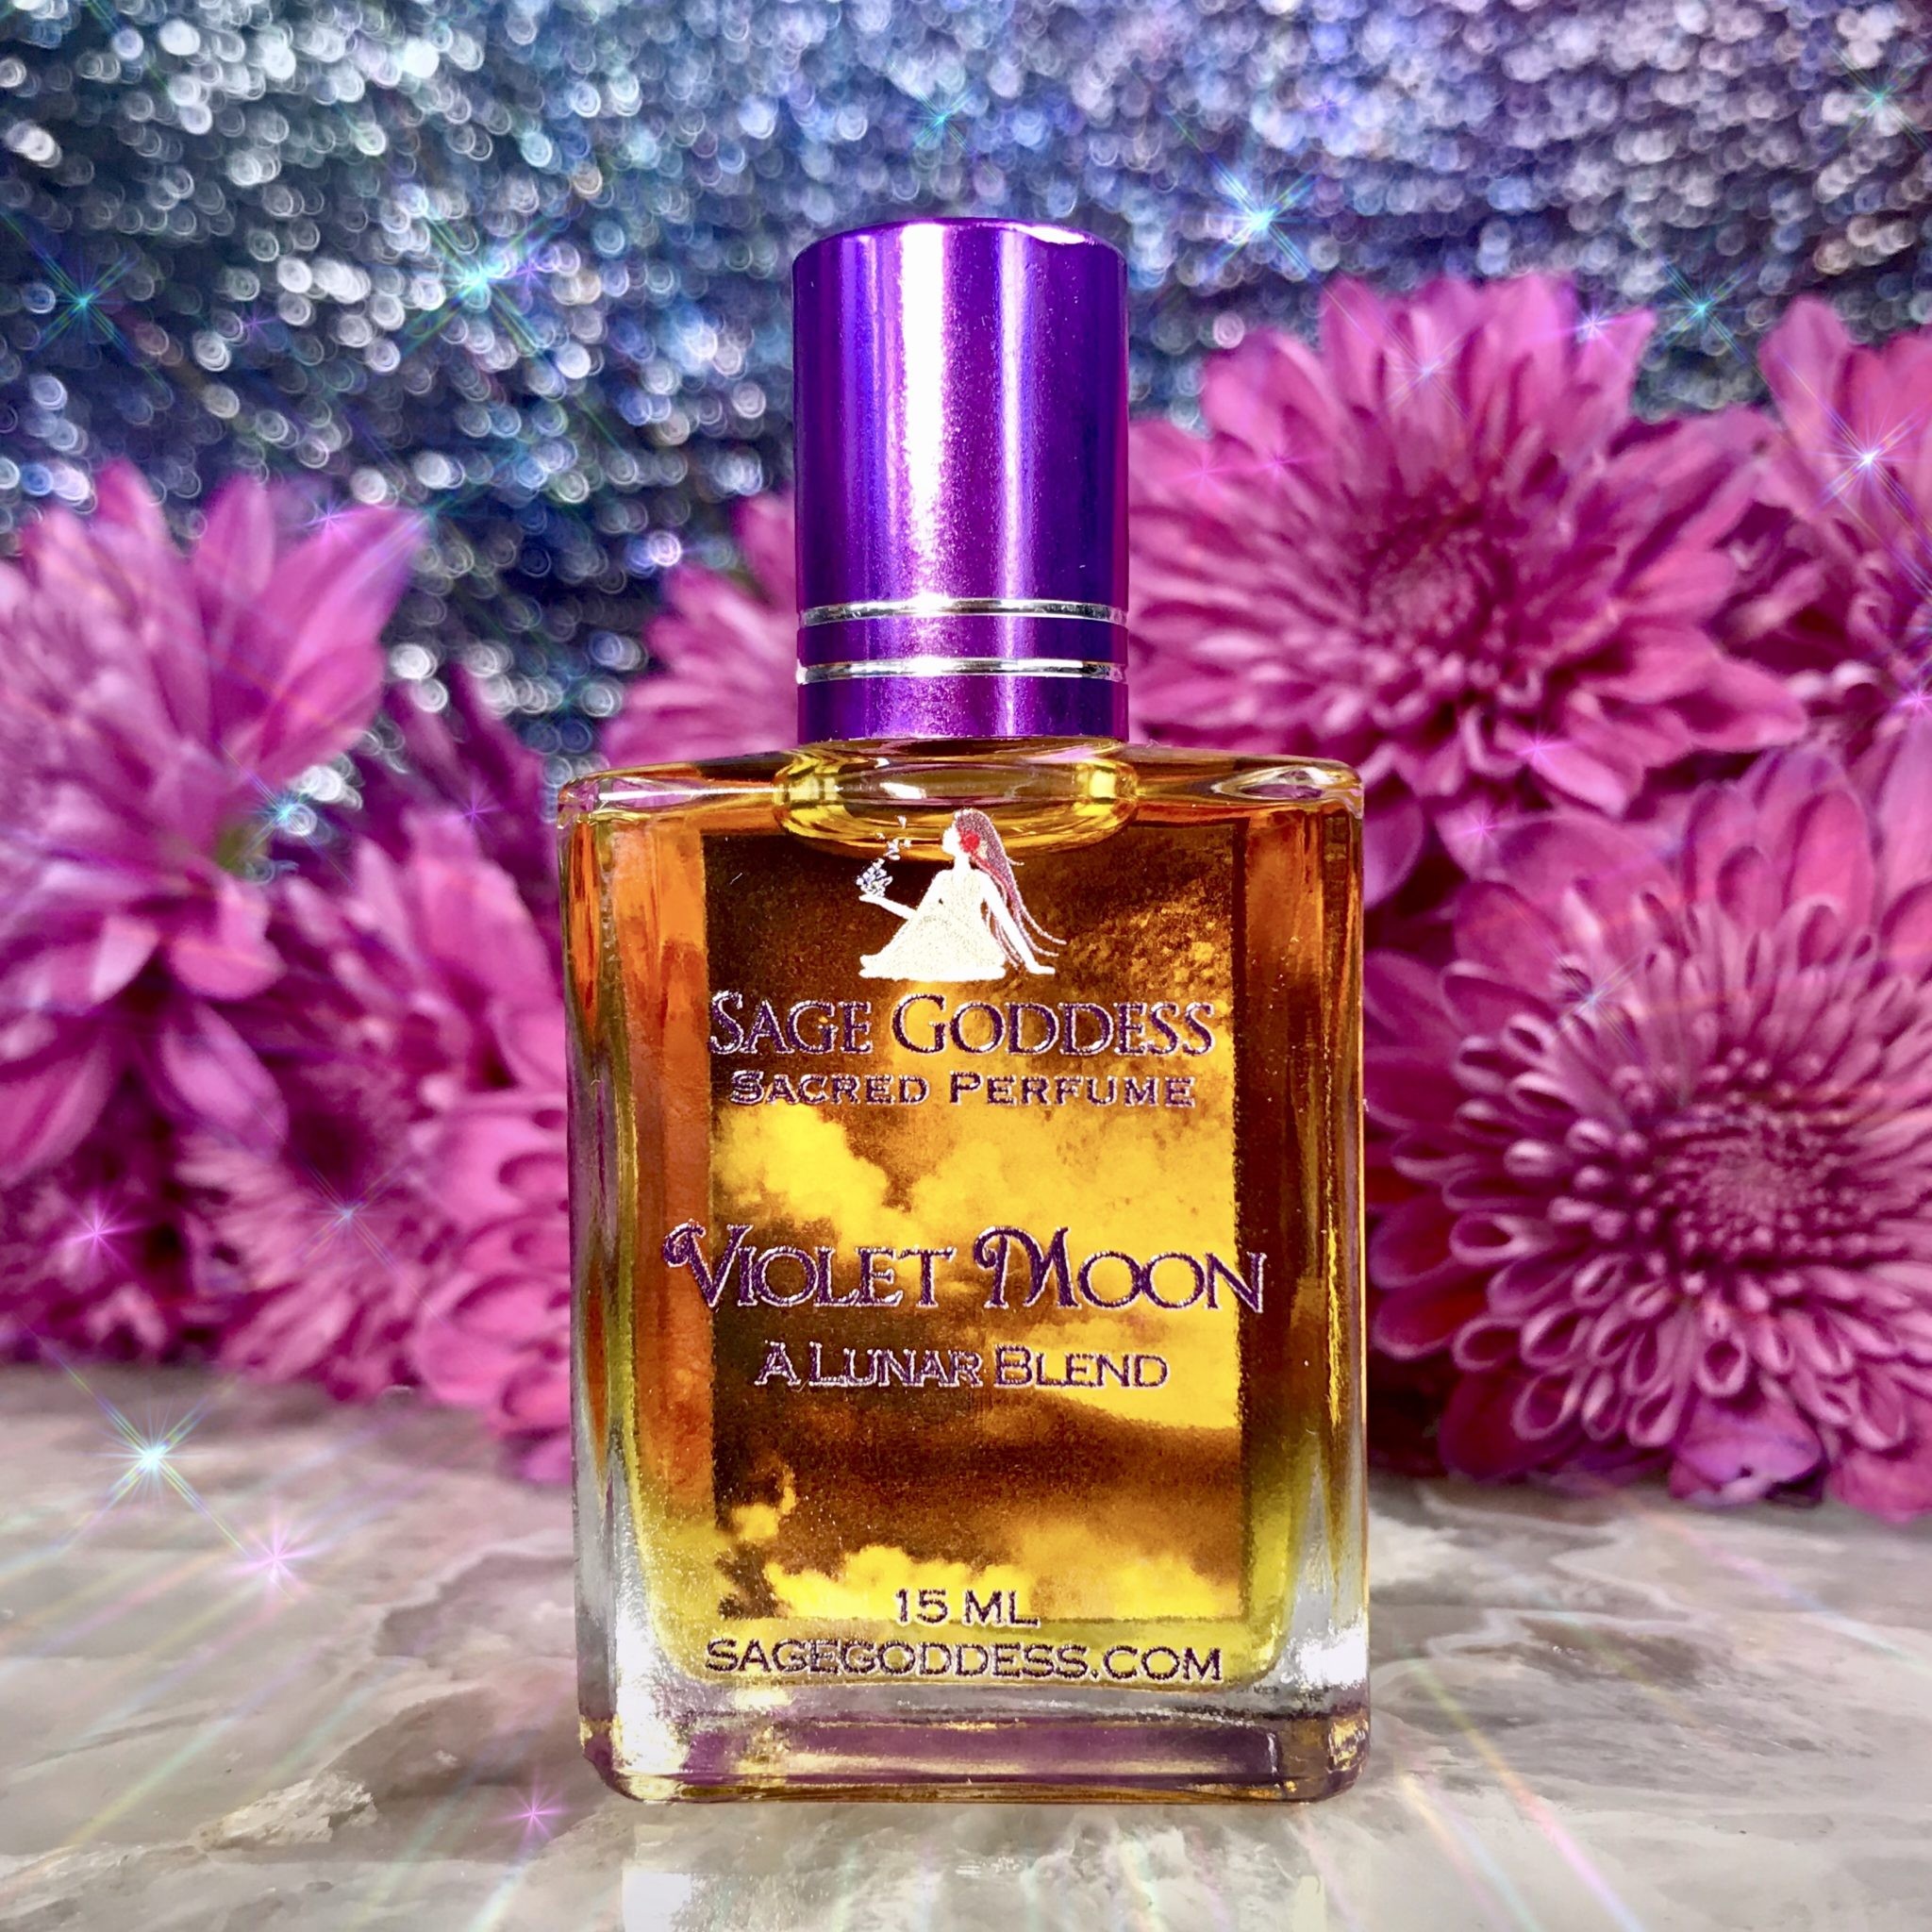 Violet Moon Perfume For Violet Flame And Crown Chakra Magic